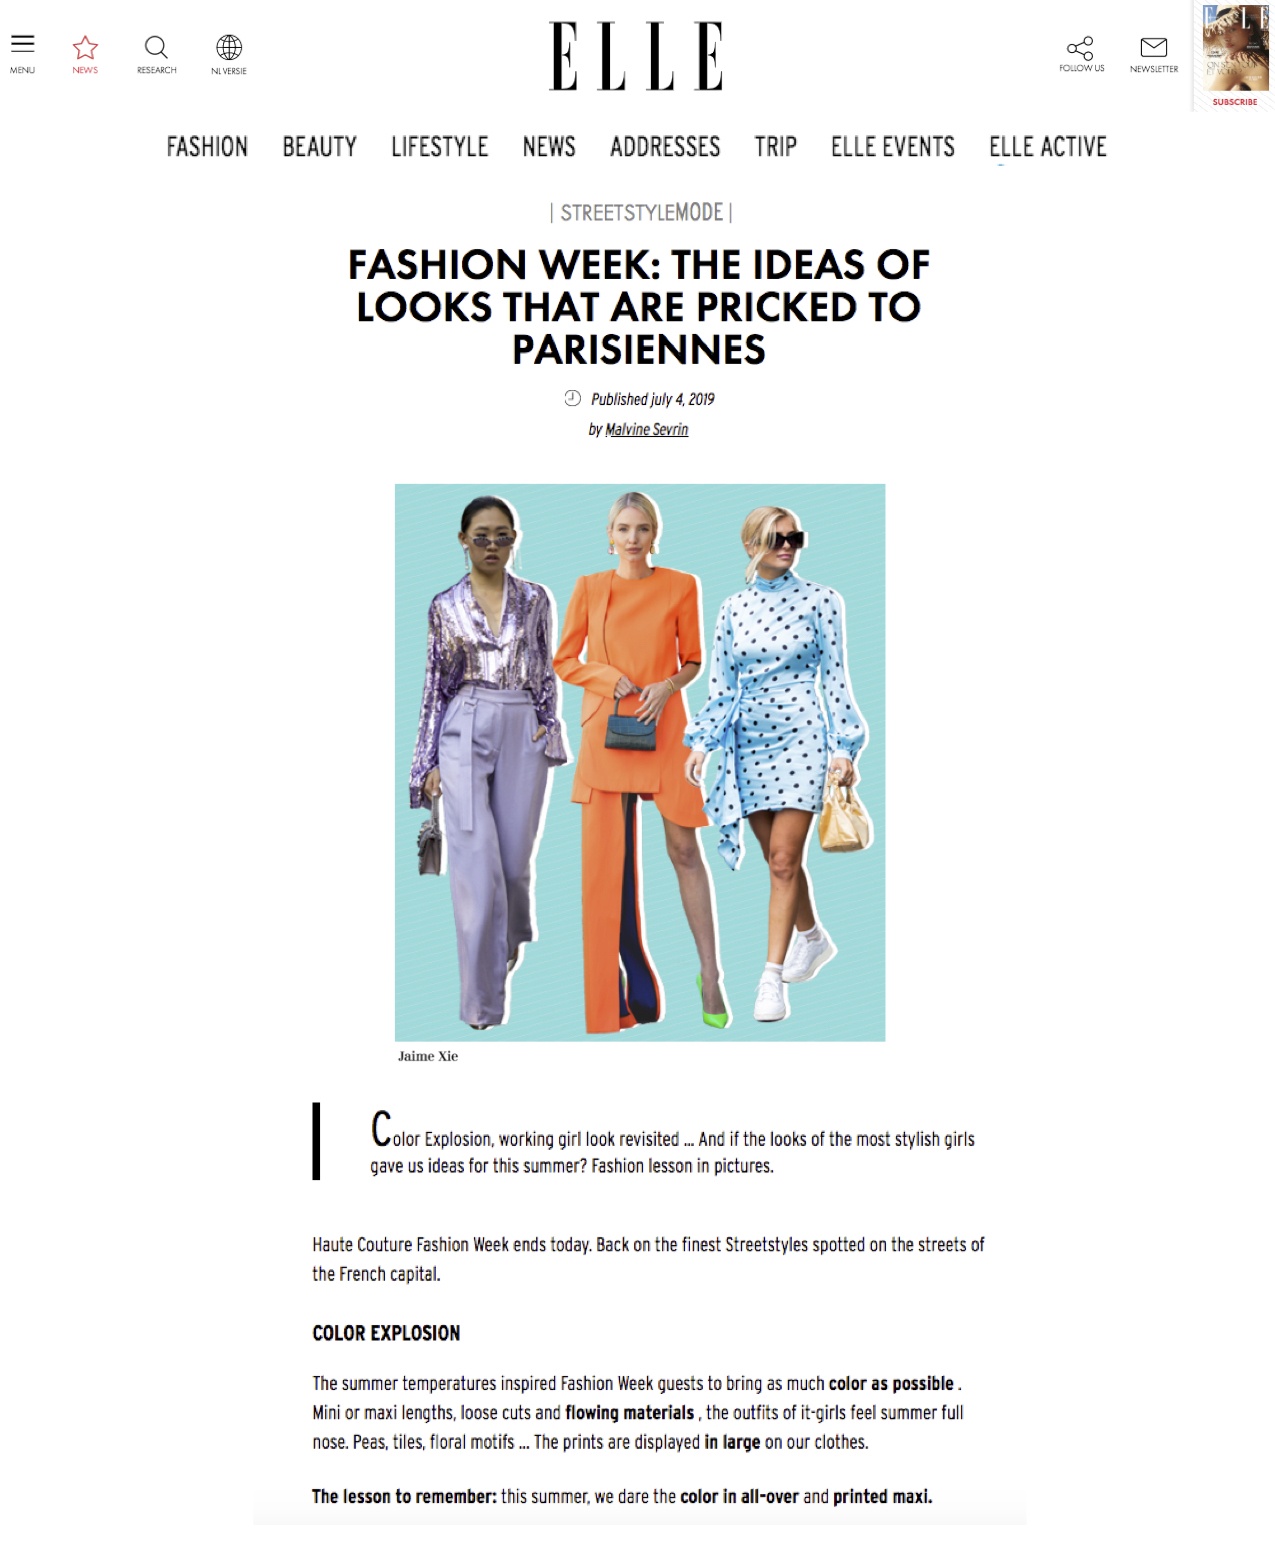 Elle France: Fashion Week – The Ideas of Looks That Are Pricked To Parisiennes